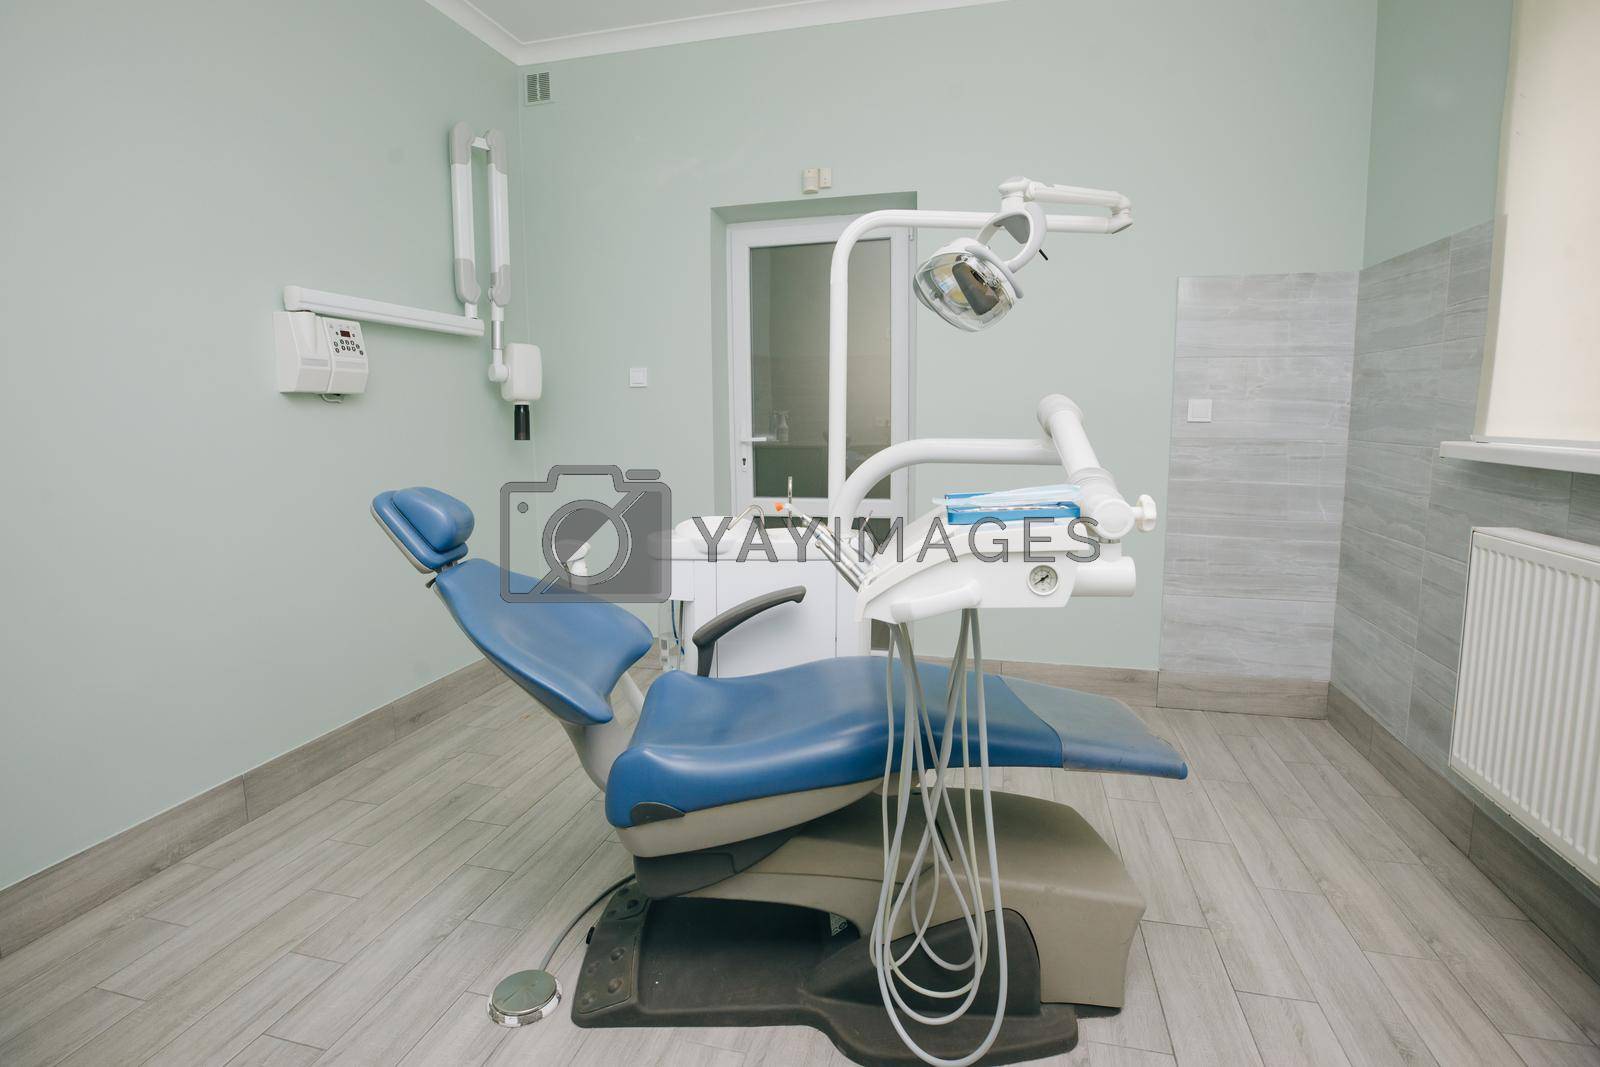 Modern dental practice. Dental chair and other accessories used by dentists in blue, medic light. Dentist Office, Dental Hygiene, Dentist's Chair.